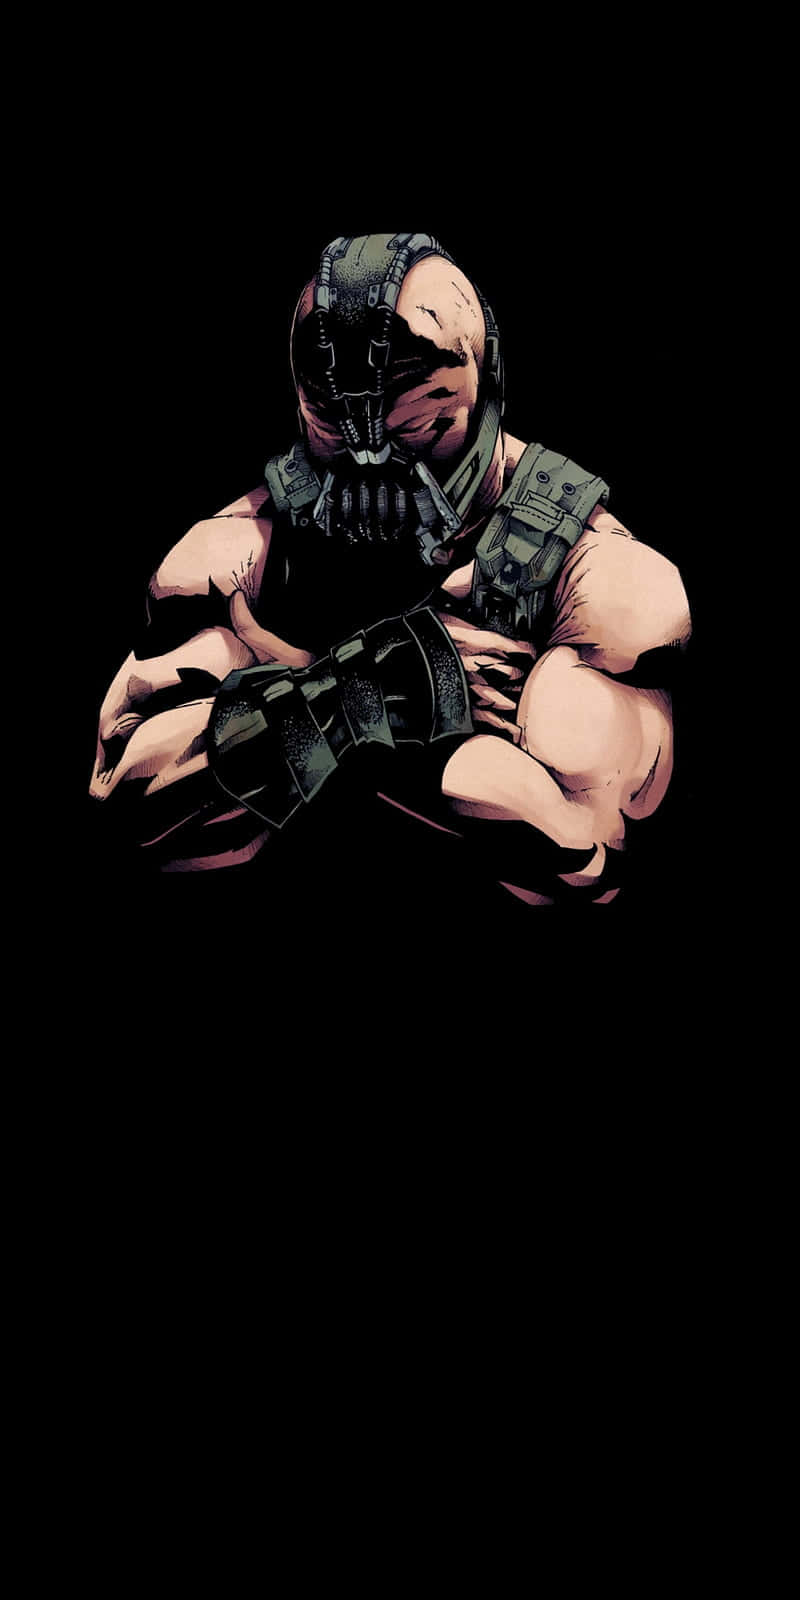 iPhone Wallpapers for iPhone 12 iPhone 11 iPhone X iPhone XR iPhone 8  Plus High Quality Wallpapers iPad Backgrounds  Bane Bane batman Tom  hardy